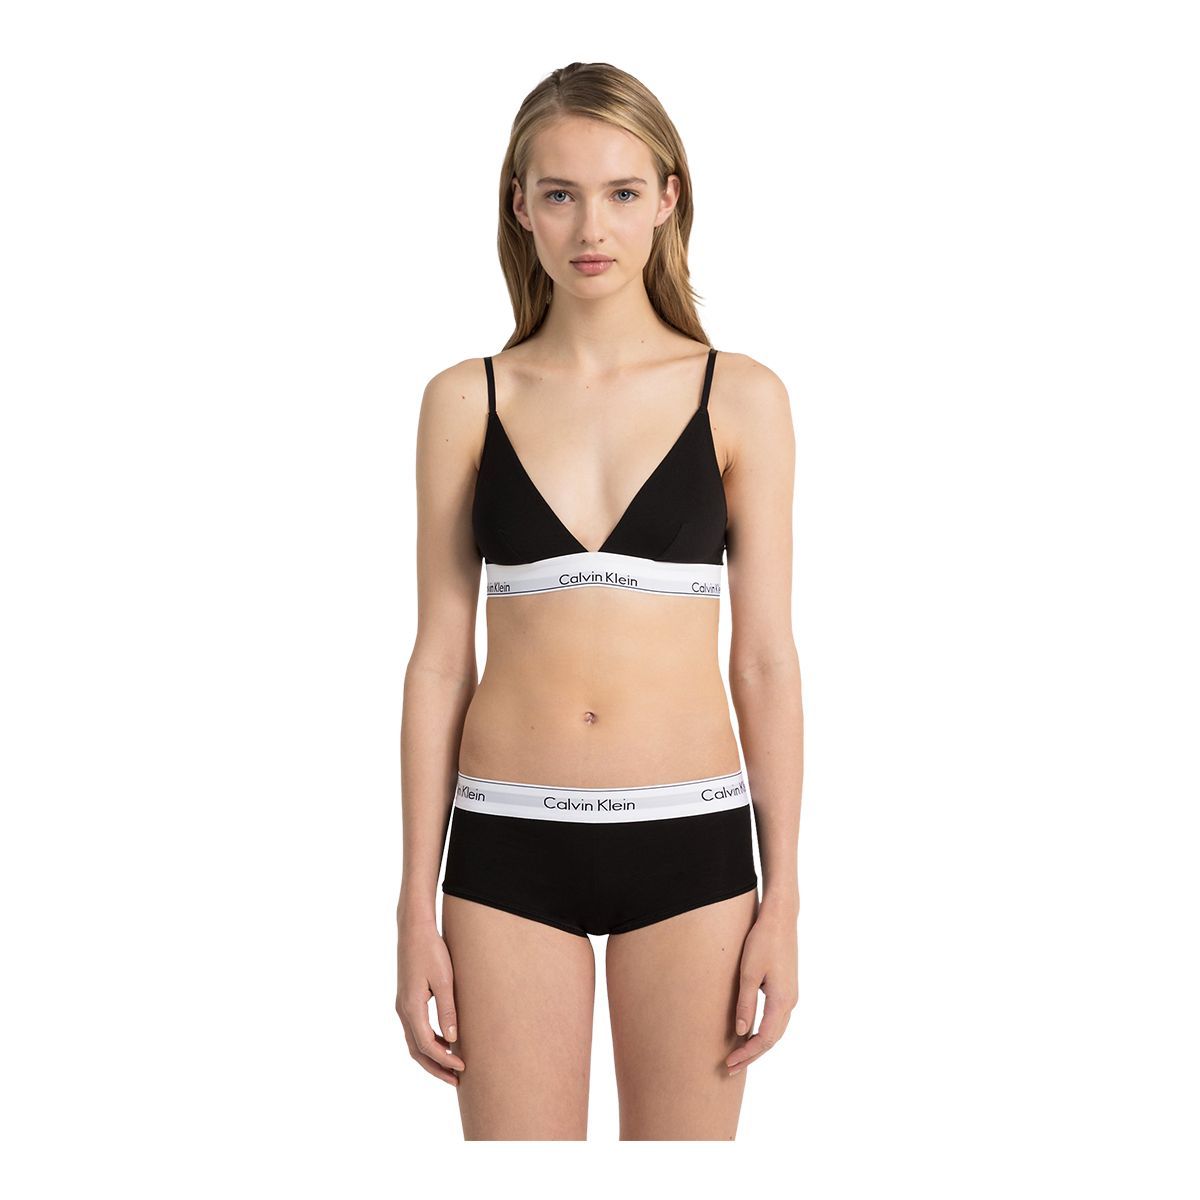 Police Auctions Canada - Women's Calvin Klein Modern Cotton Unlined Triangle  Bralette - Size S (521926L)